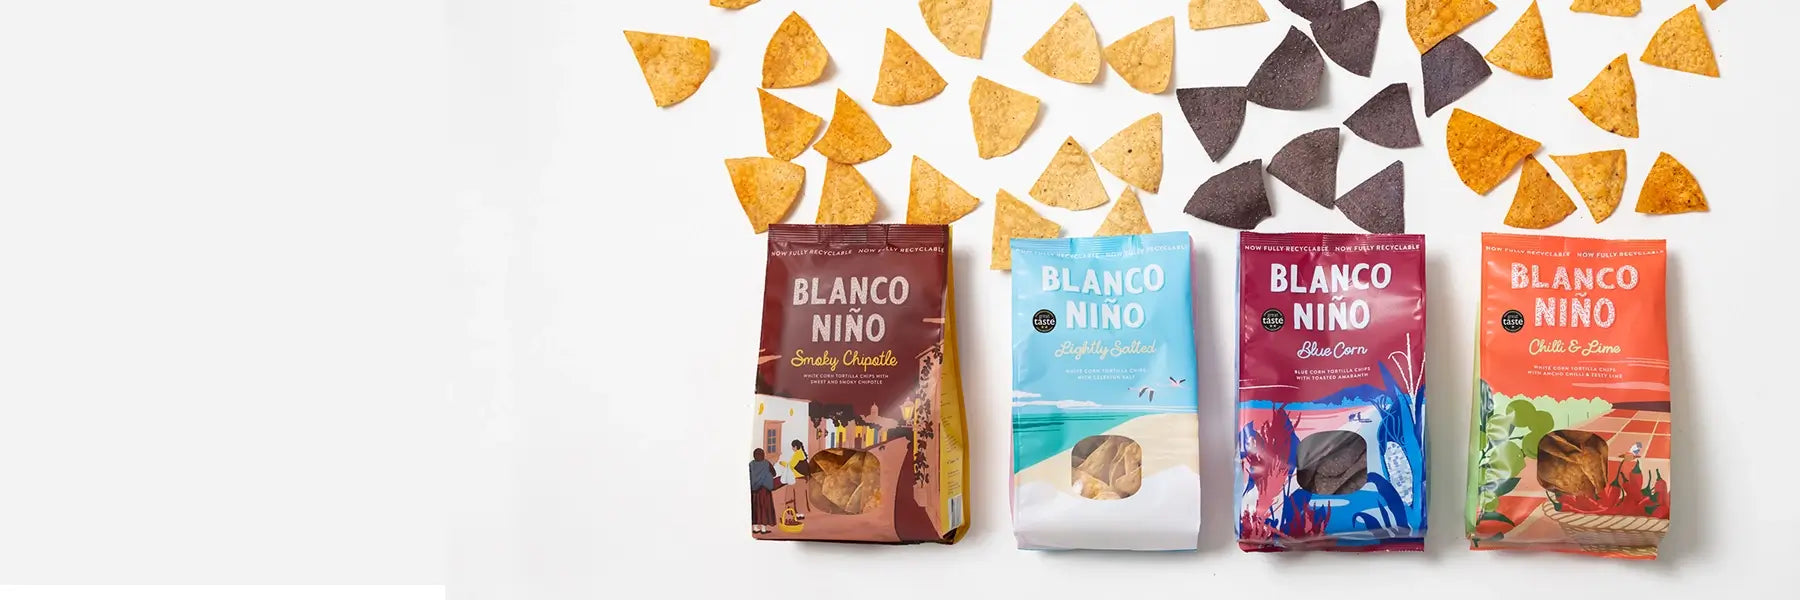 Blanco Nino all four flavours bags and scattered chips